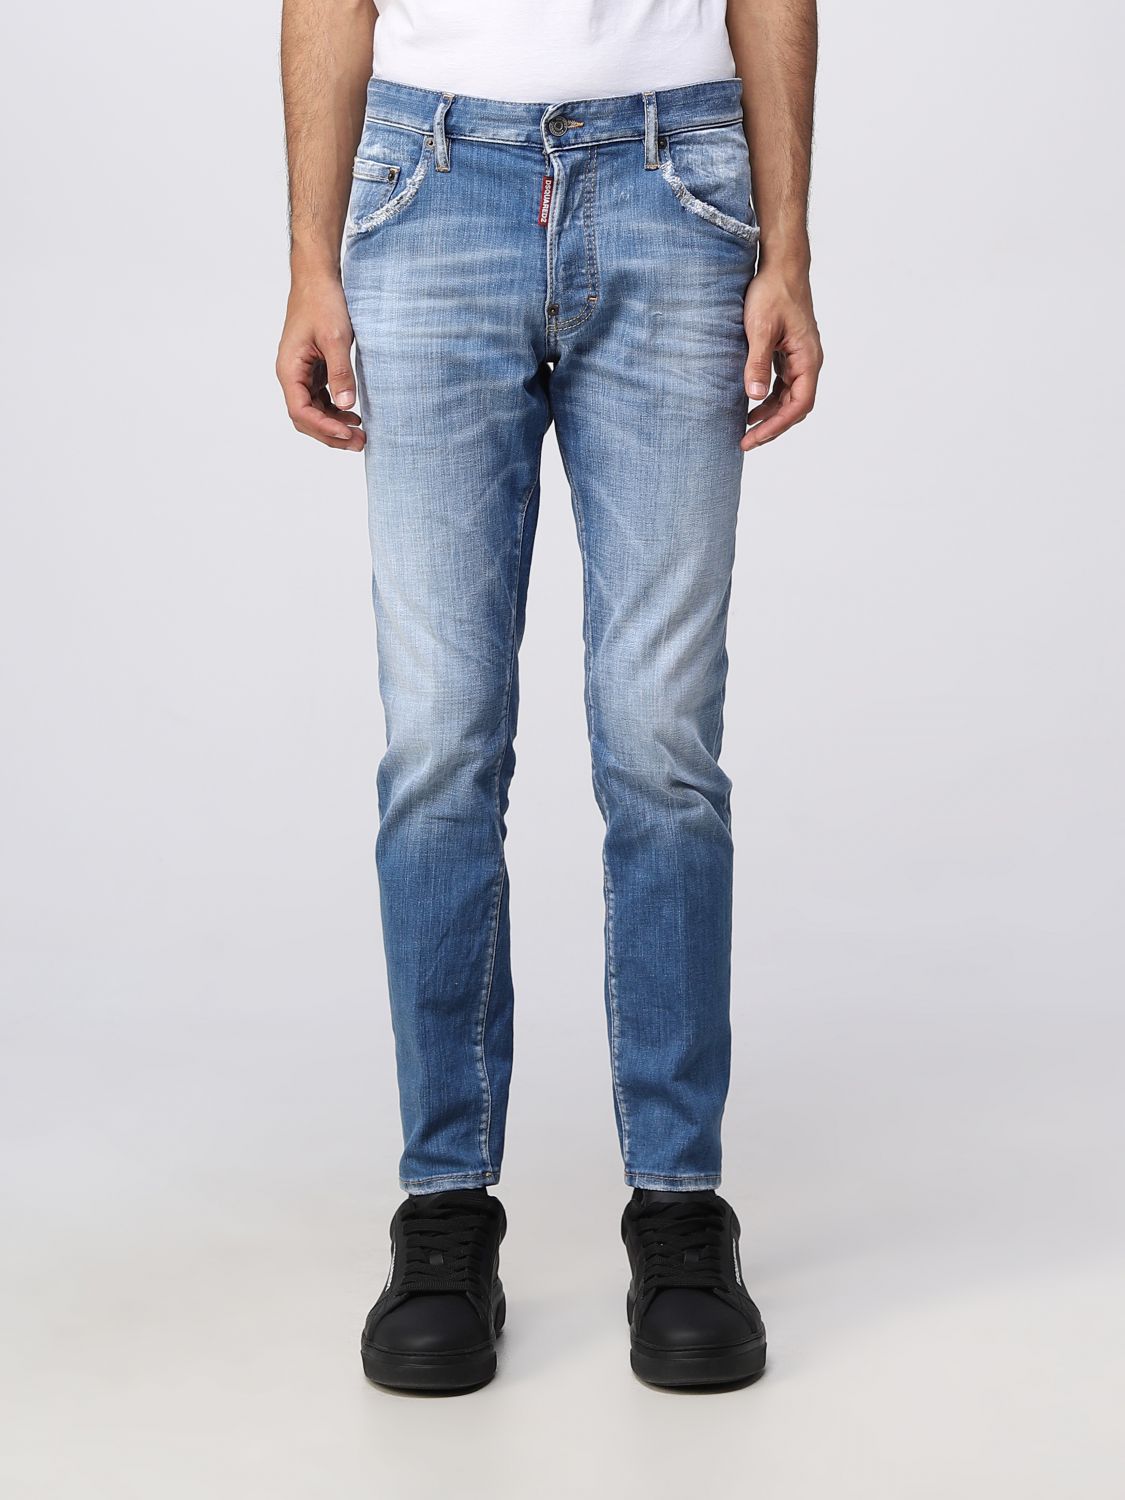 legering Ongepast Struikelen DSQUARED2: jeans for man - Denim | Dsquared2 jeans S74LB1276S30342 online  on GIGLIO.COM